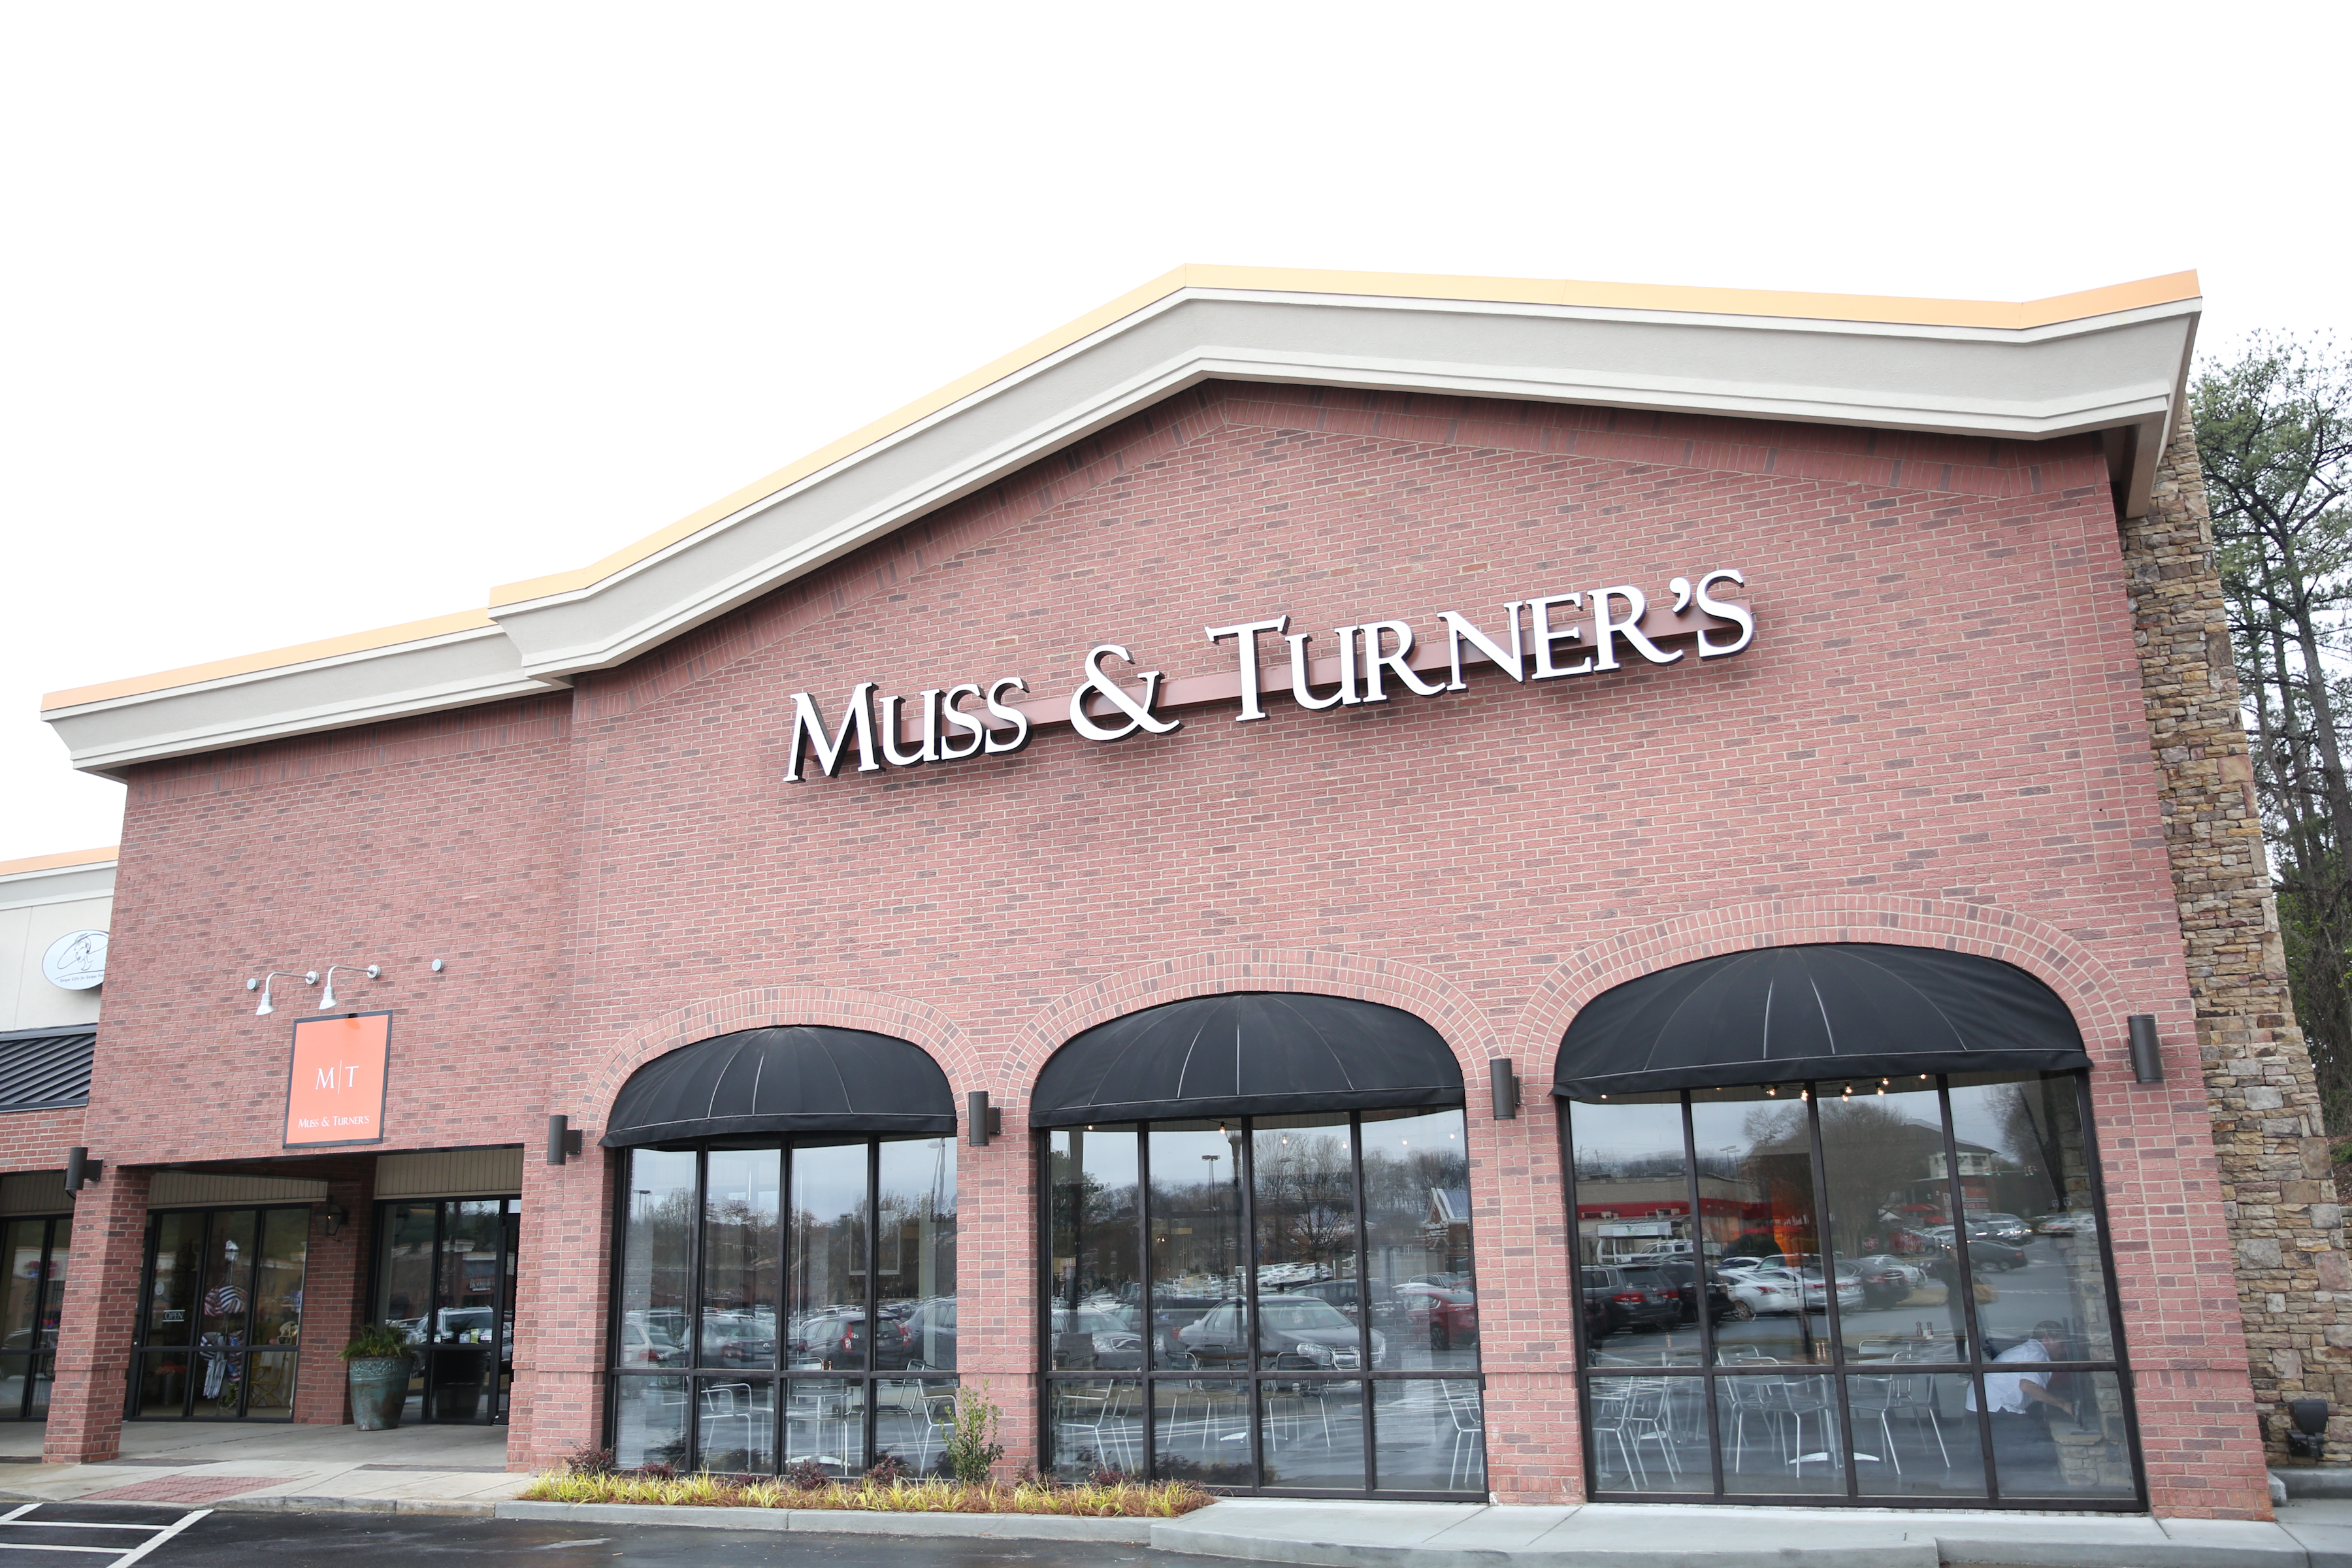 Facebook Friday Freebie! Win A Private Wine Tasting Event at Muss & Turner’s – East Cobb!